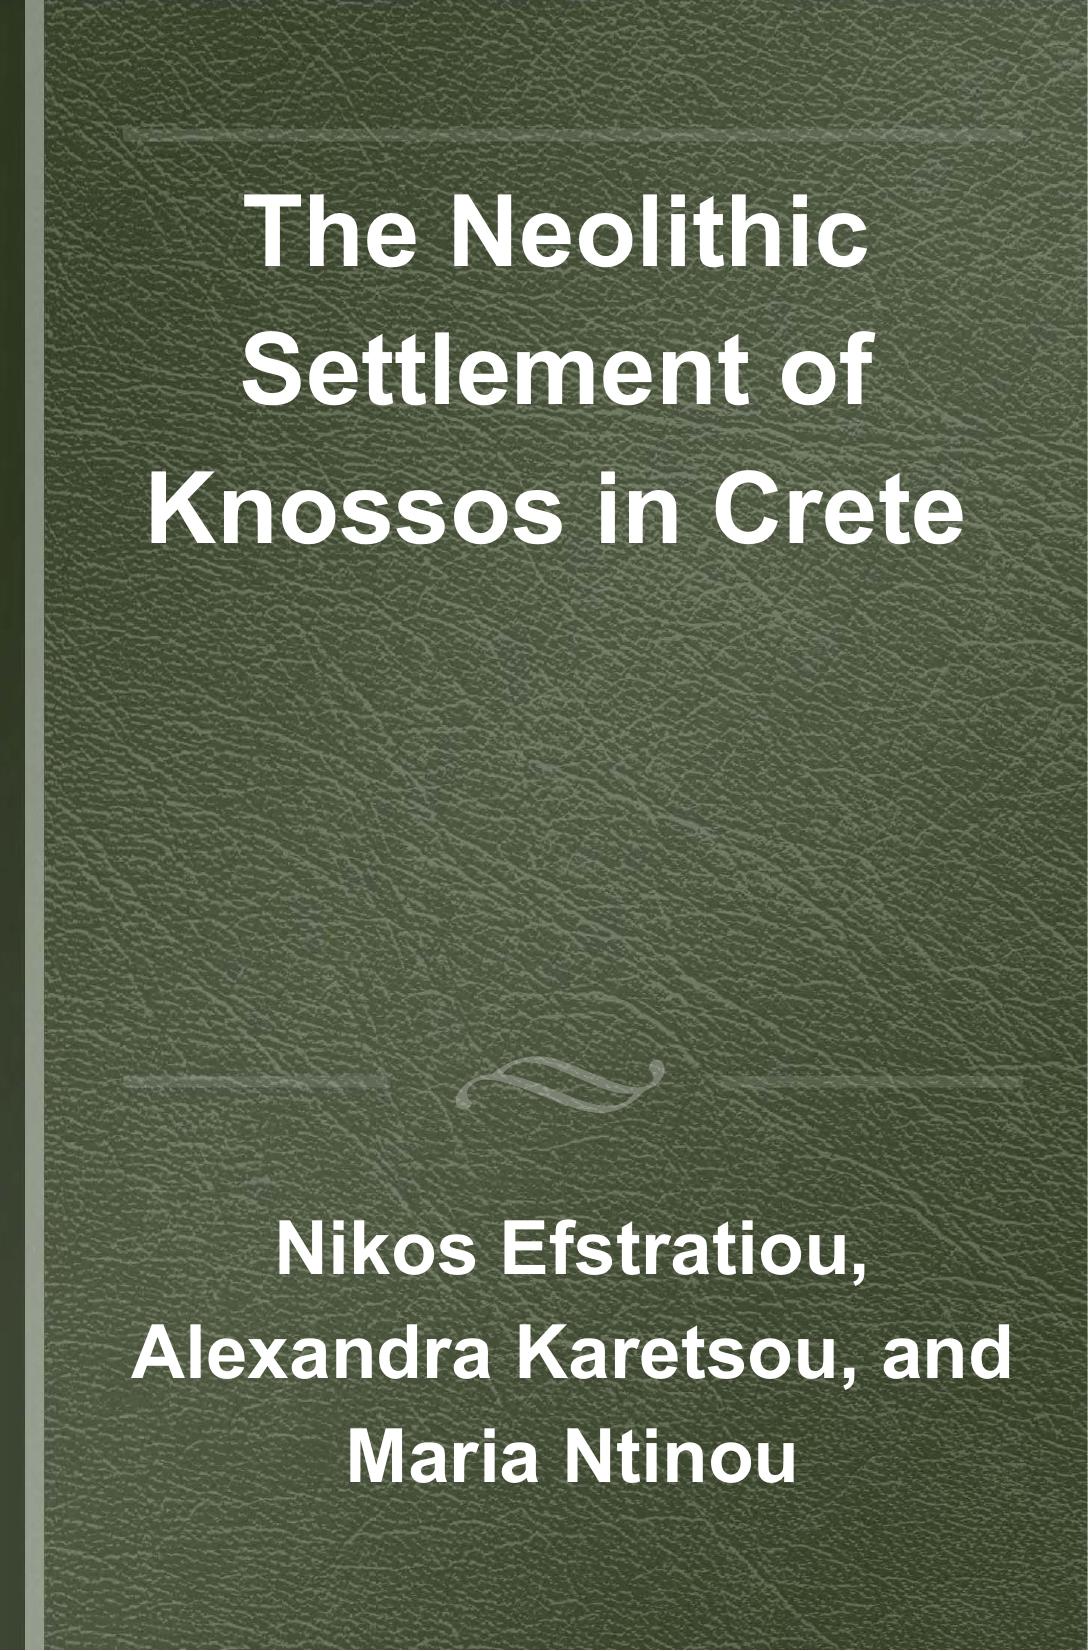 The Neolithic Settlement of Knossos in Crete: New Evidence for the Early Occupation of Crete and the Aegean Islands by Nikos Efstratiou (editor) Alexandra Karetsou (editor) Maria Ntinou (editor)